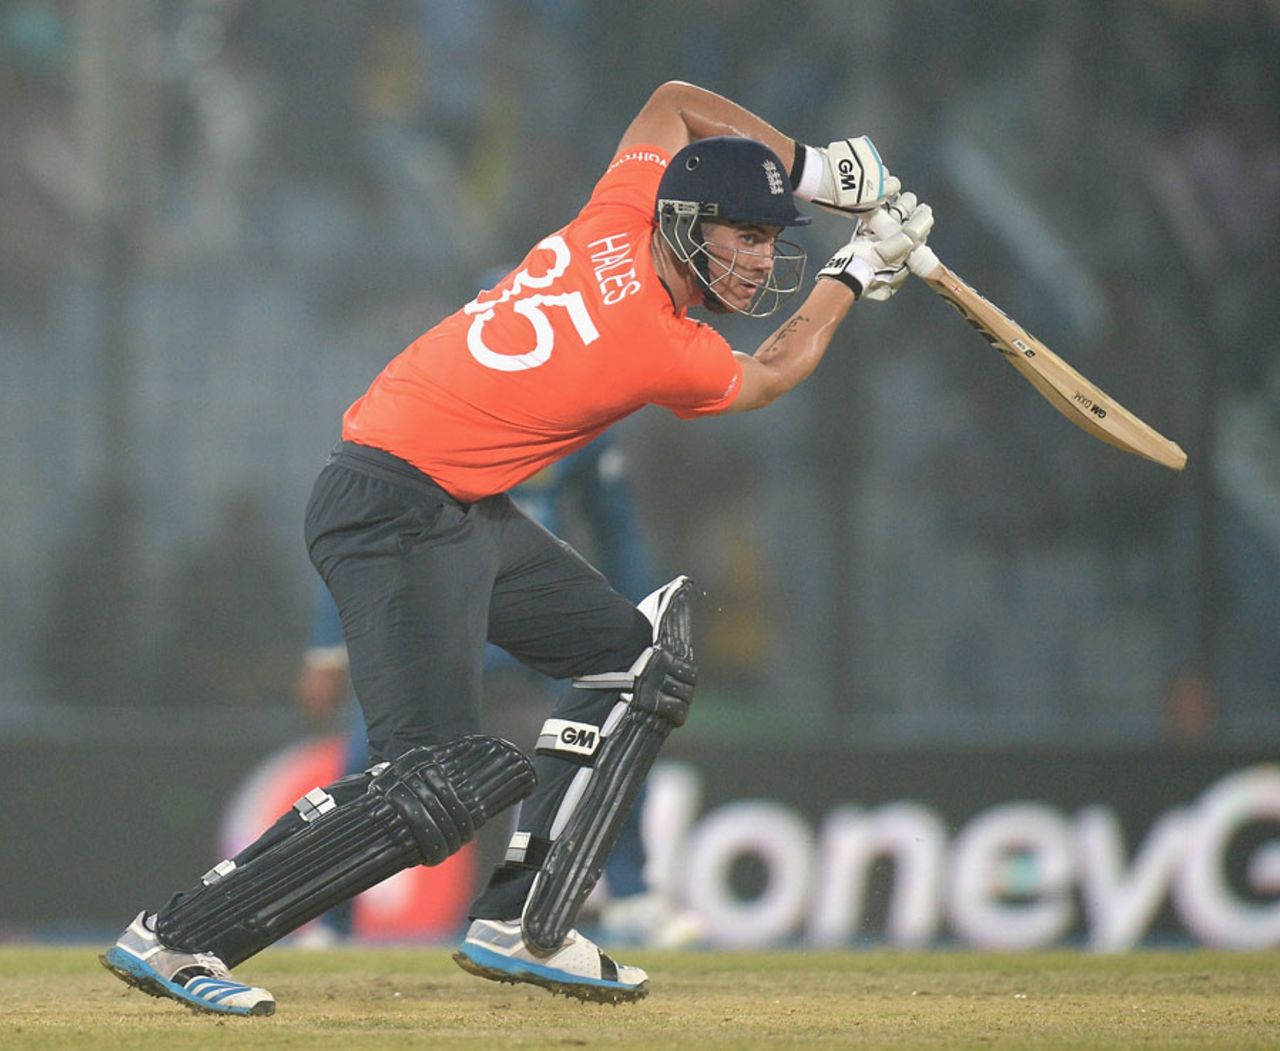 Alex Hales went past fifty in 38 balls, England v Sri Lanka, World T20, Group 1, Chittagong, March, 27, 2014